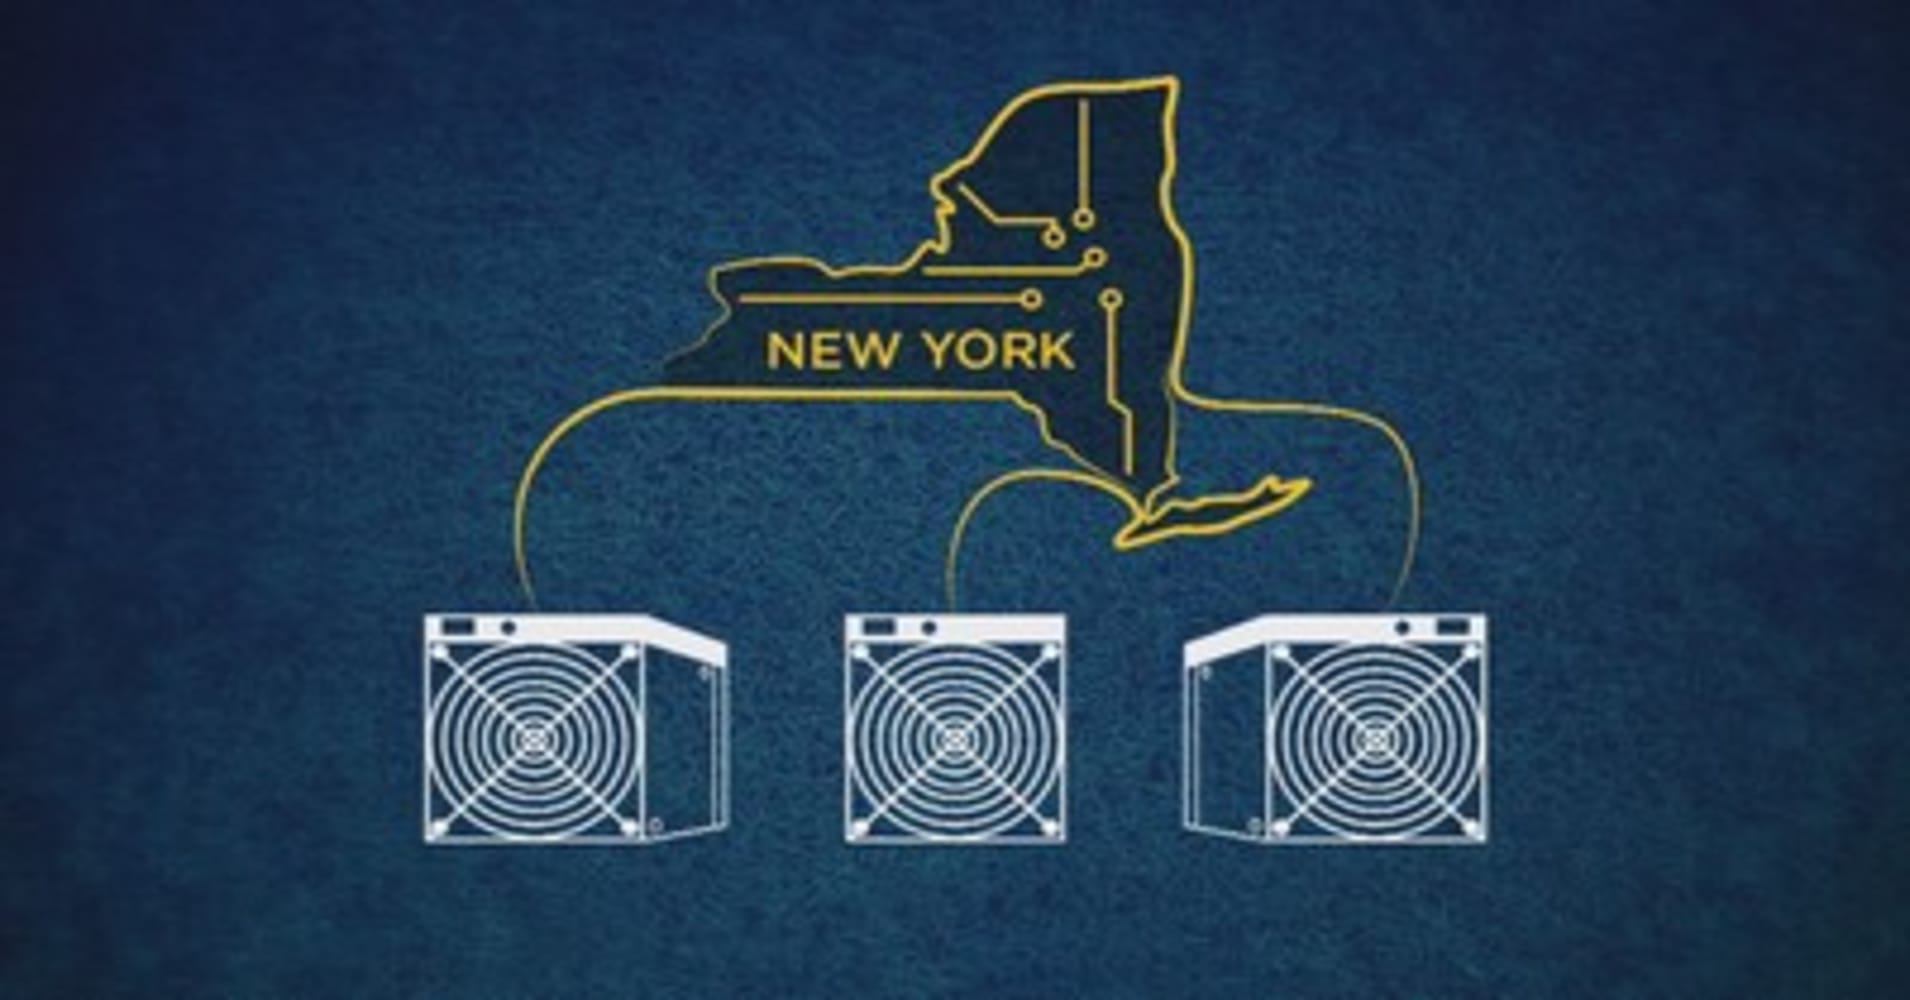 Bitcoin Mining Firms Getting Pushback From New York State - 